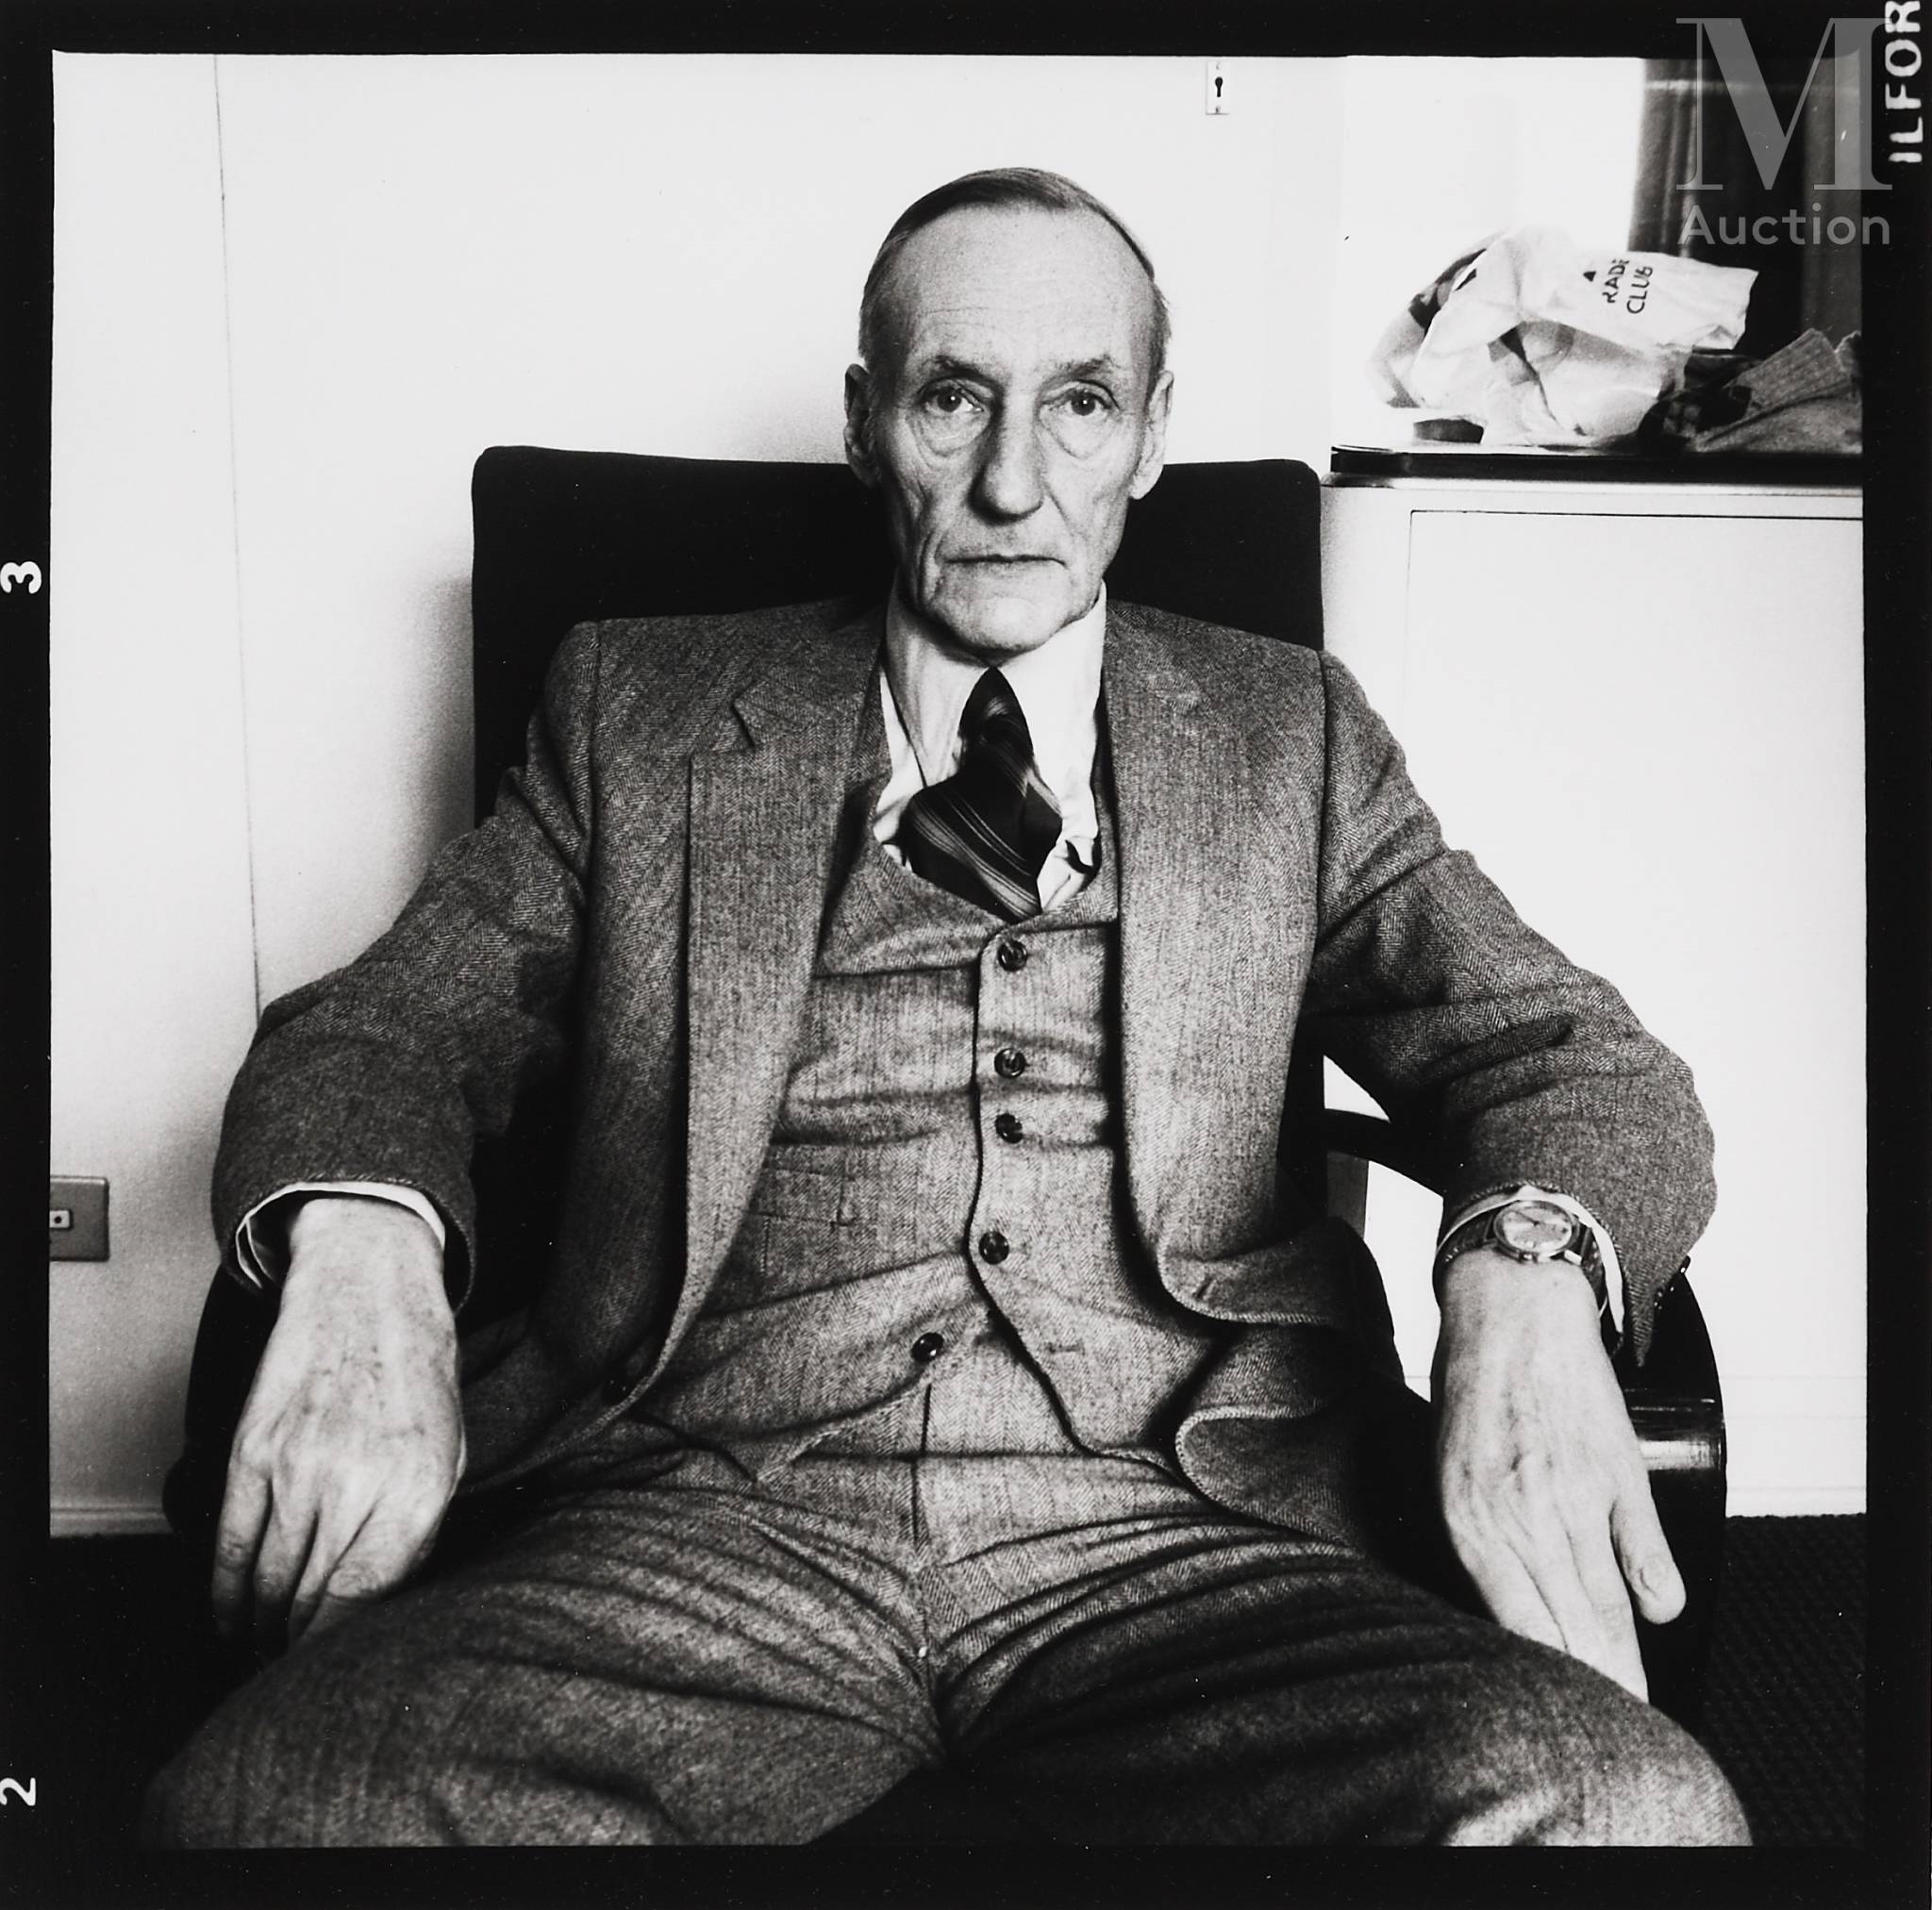 William S. Burroughs, New York, 1981 by Marc Trivier, 1981